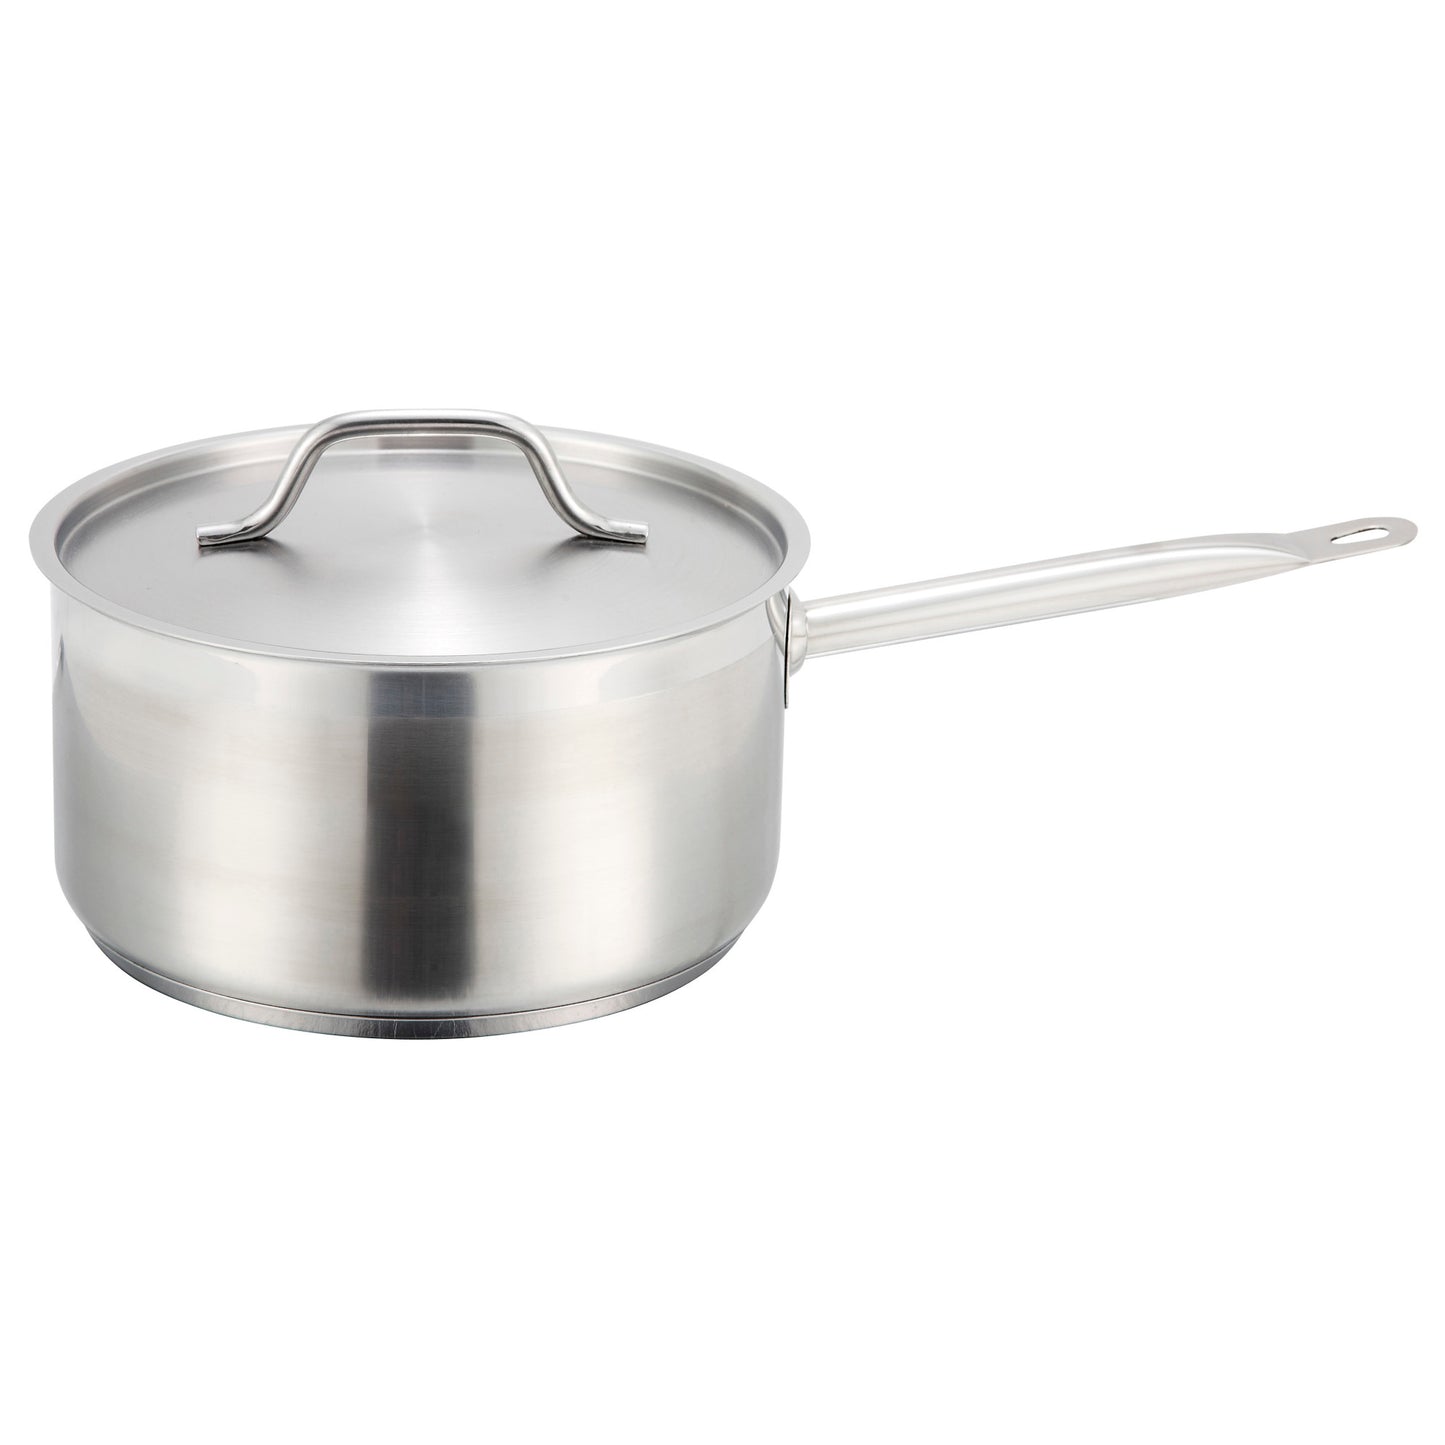 SSSP-3 - Stainless Steel Sauce Pan with Cover - 3-1/2 Quart